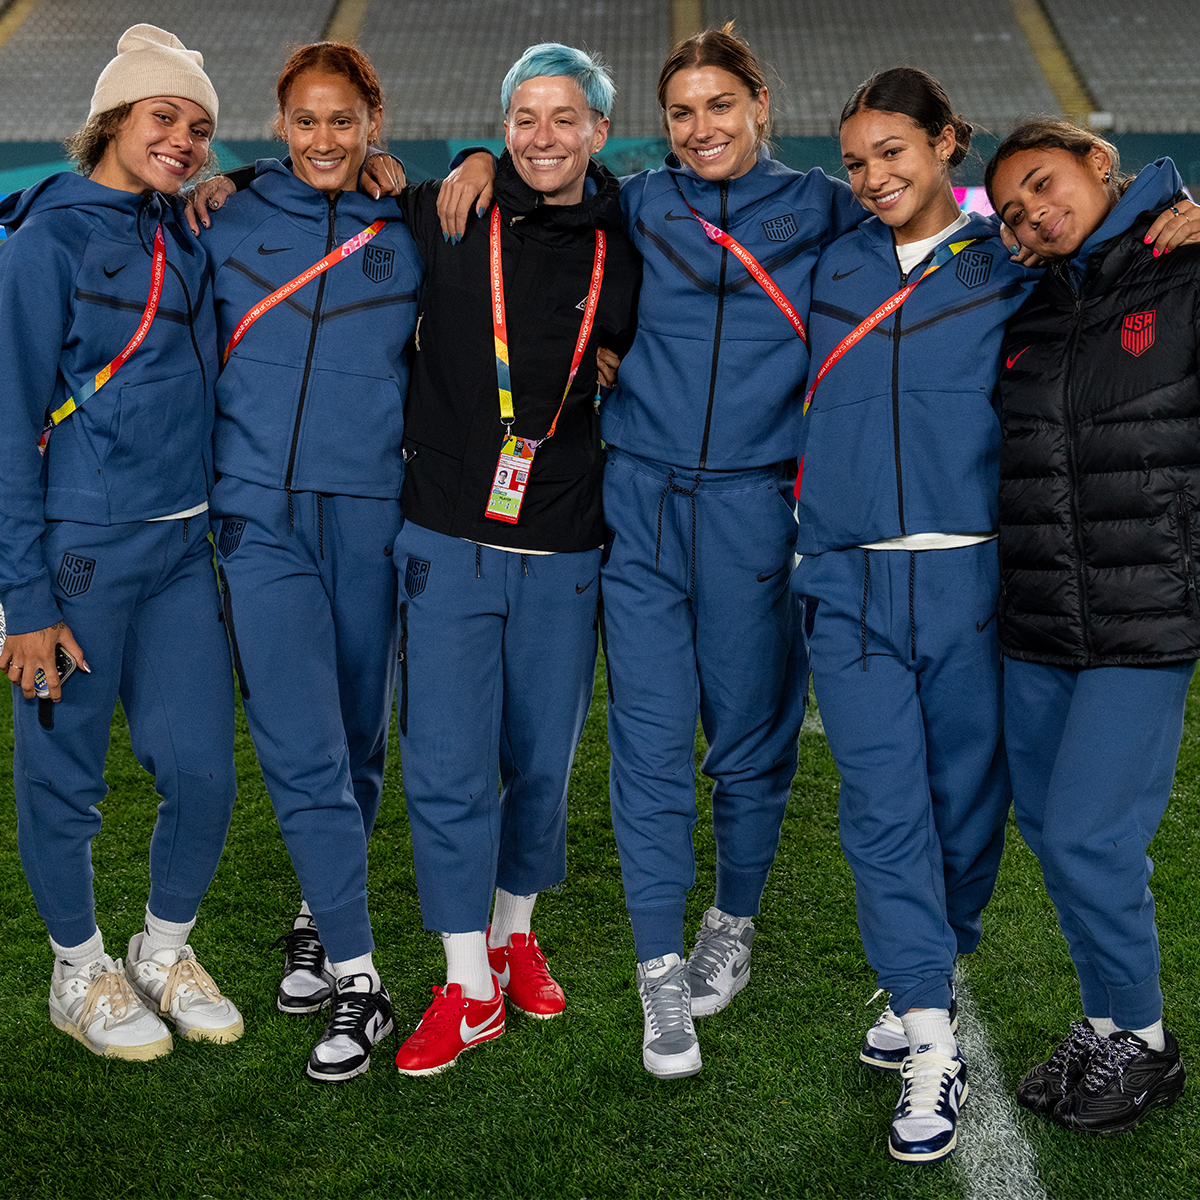 U.S. Women's team's new uniforms revealed ahead of this summer's World Cup